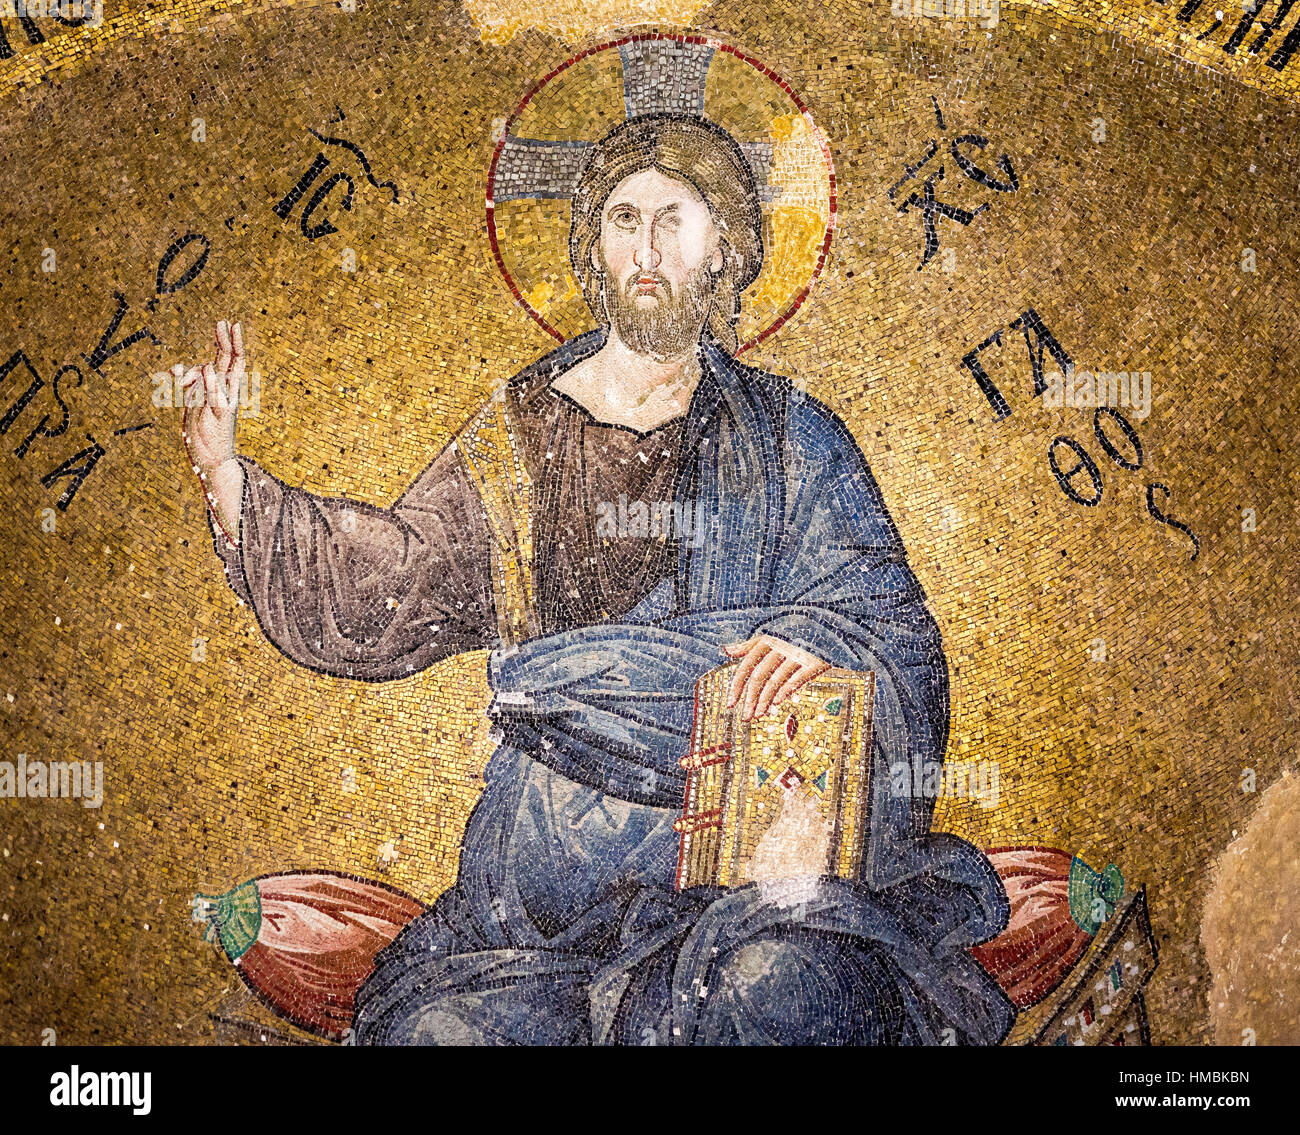 Byzantine Mosaic of Christ pantocrator, sitting on a throne, Pammakaristos church in Istanbul, Turkey - October 11, 2013 Stock Photo